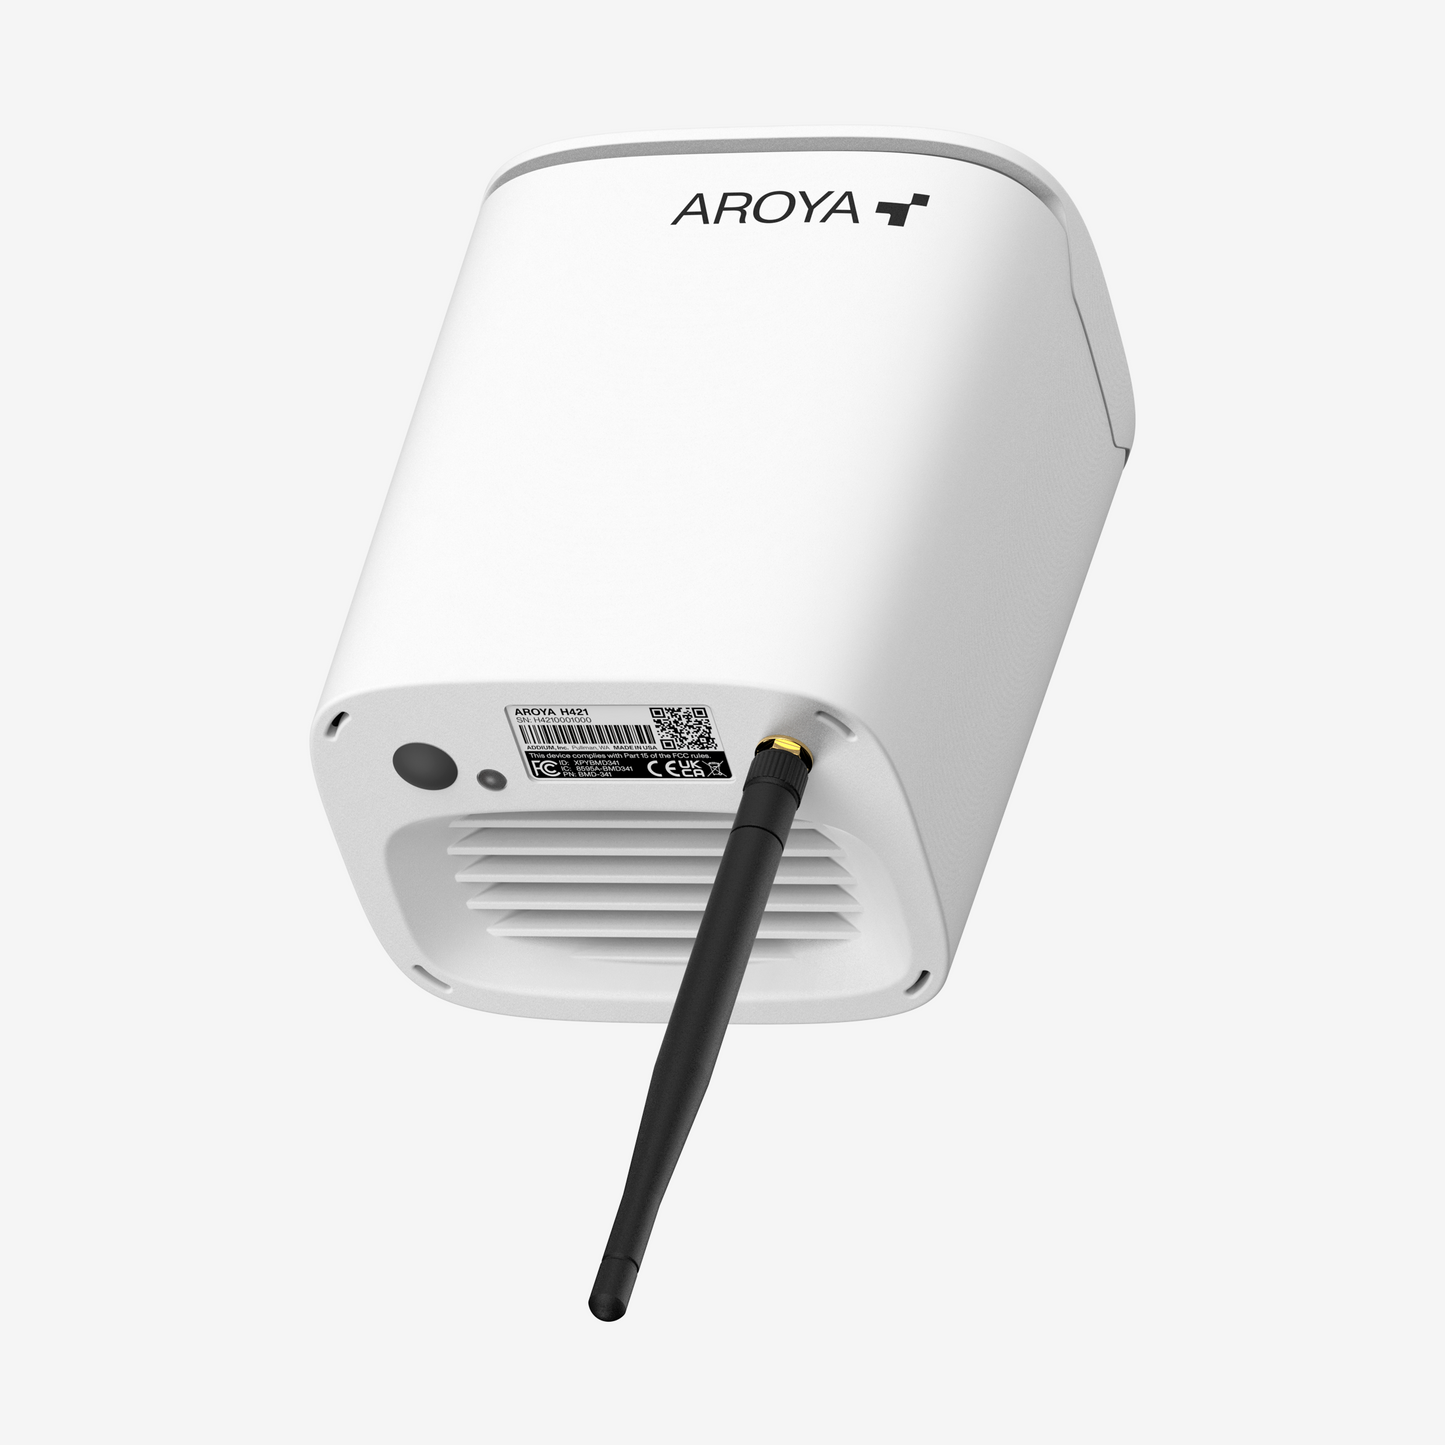 AROYA CLIMATE ONE Aspirated Climate Station